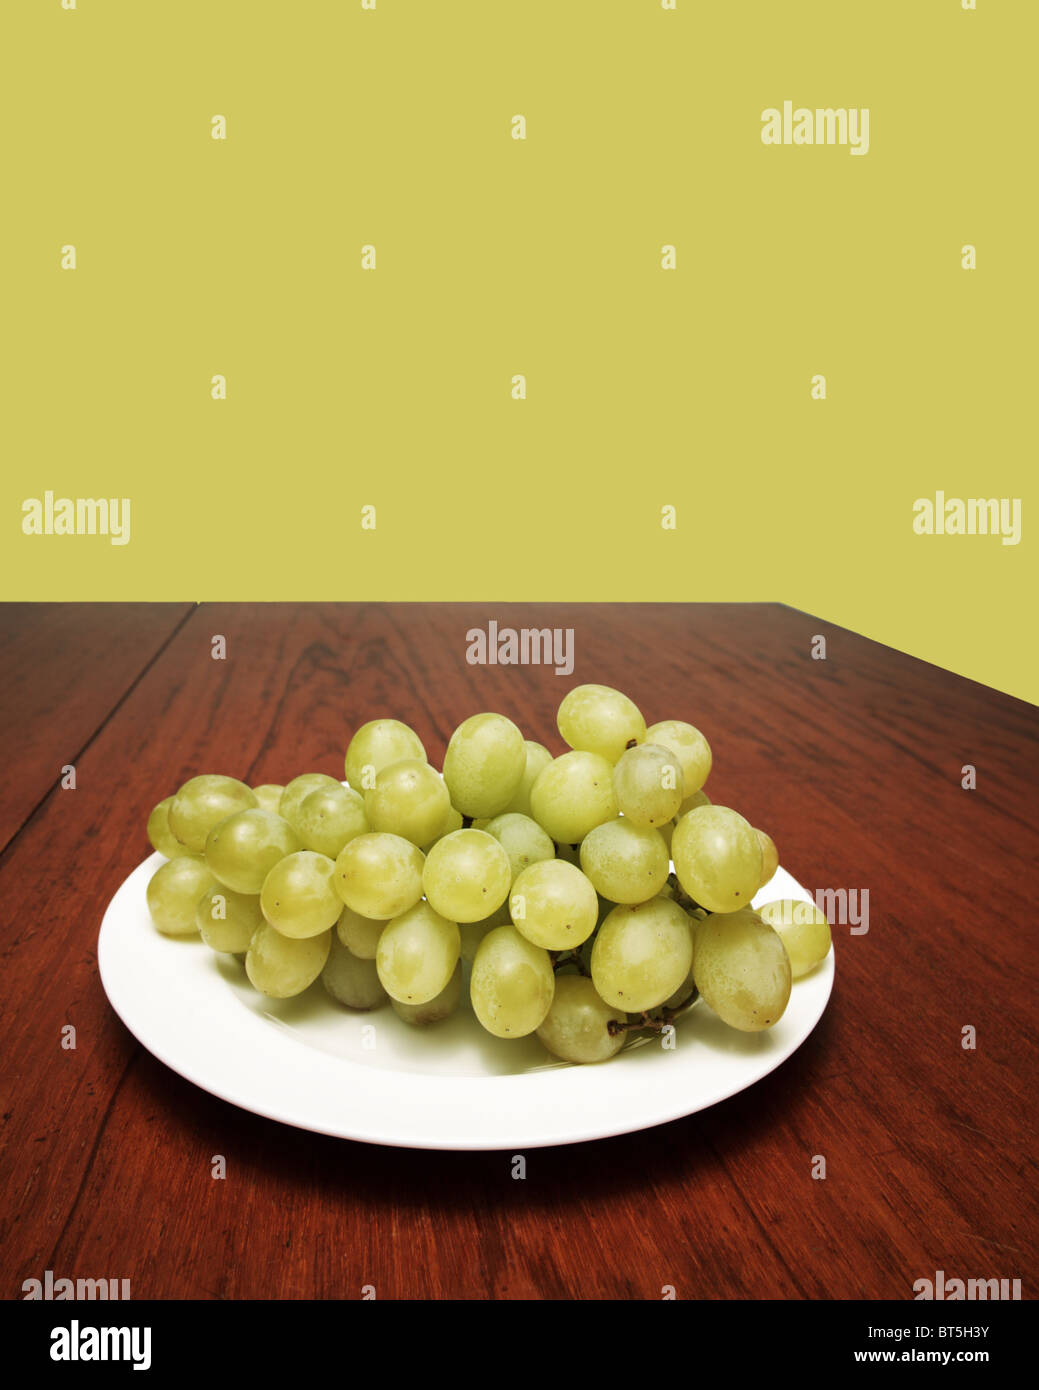 Bunch of white grapes on a white plate on a wooden table with a grape-coloured background Stock Photo